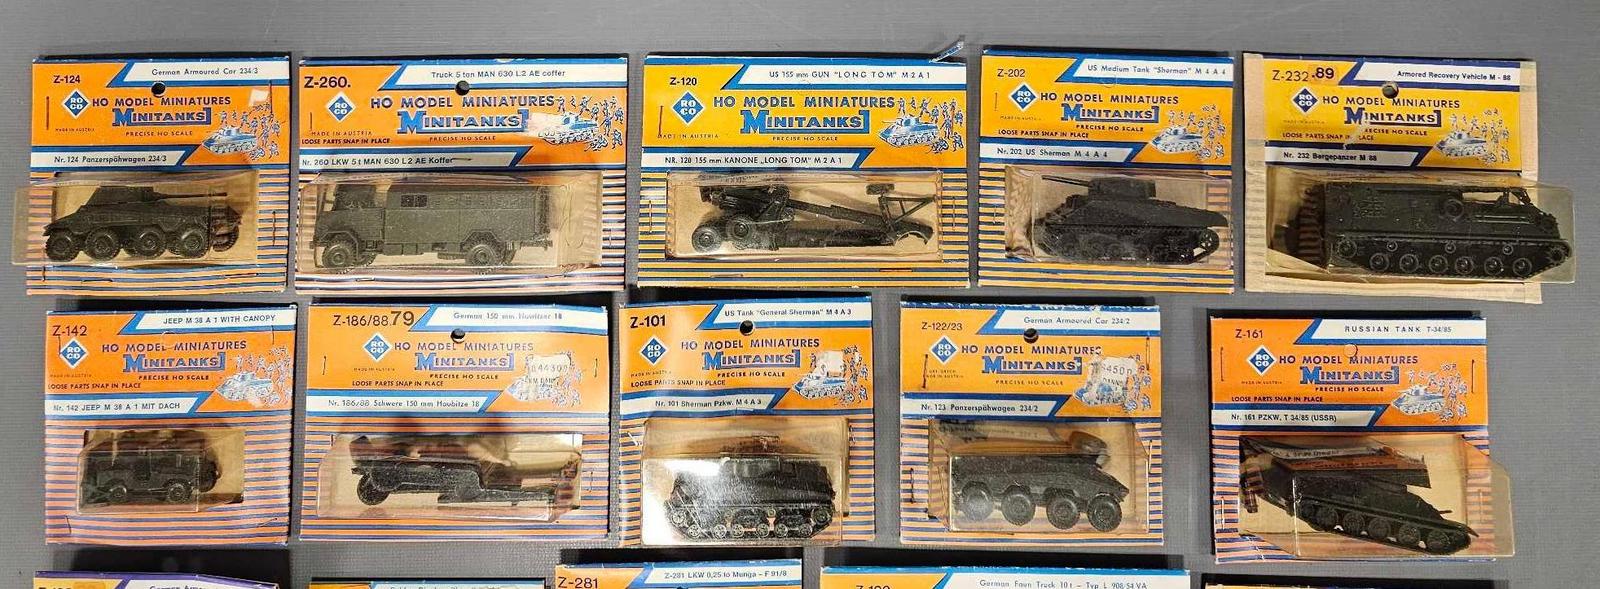 Large group of vintage Roco HO model miniatures minitanks in packages ...